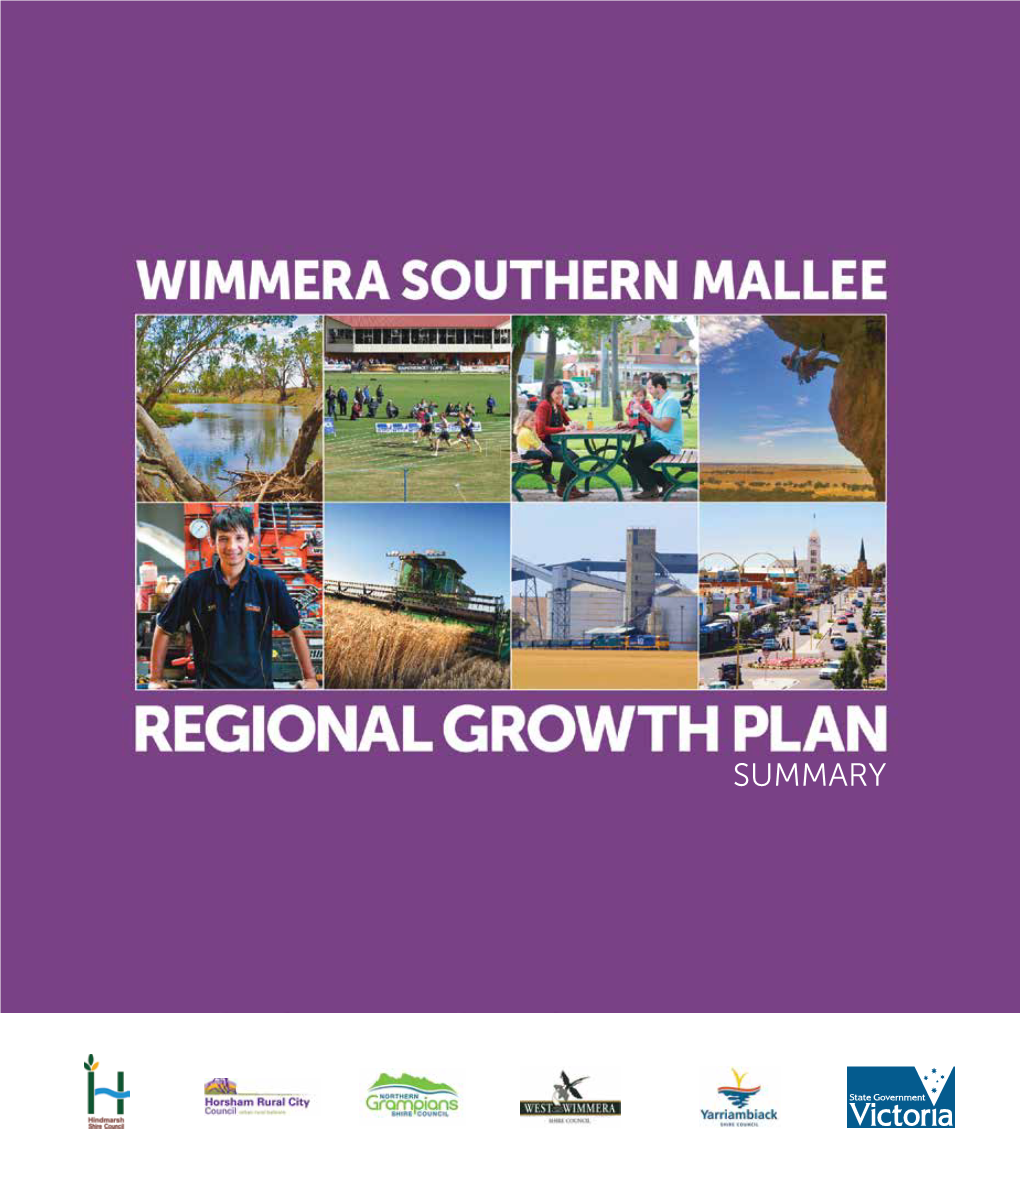 SUMMARY This Document Is a Summary of the Wimmera Southern Mallee Regional Growth Plan